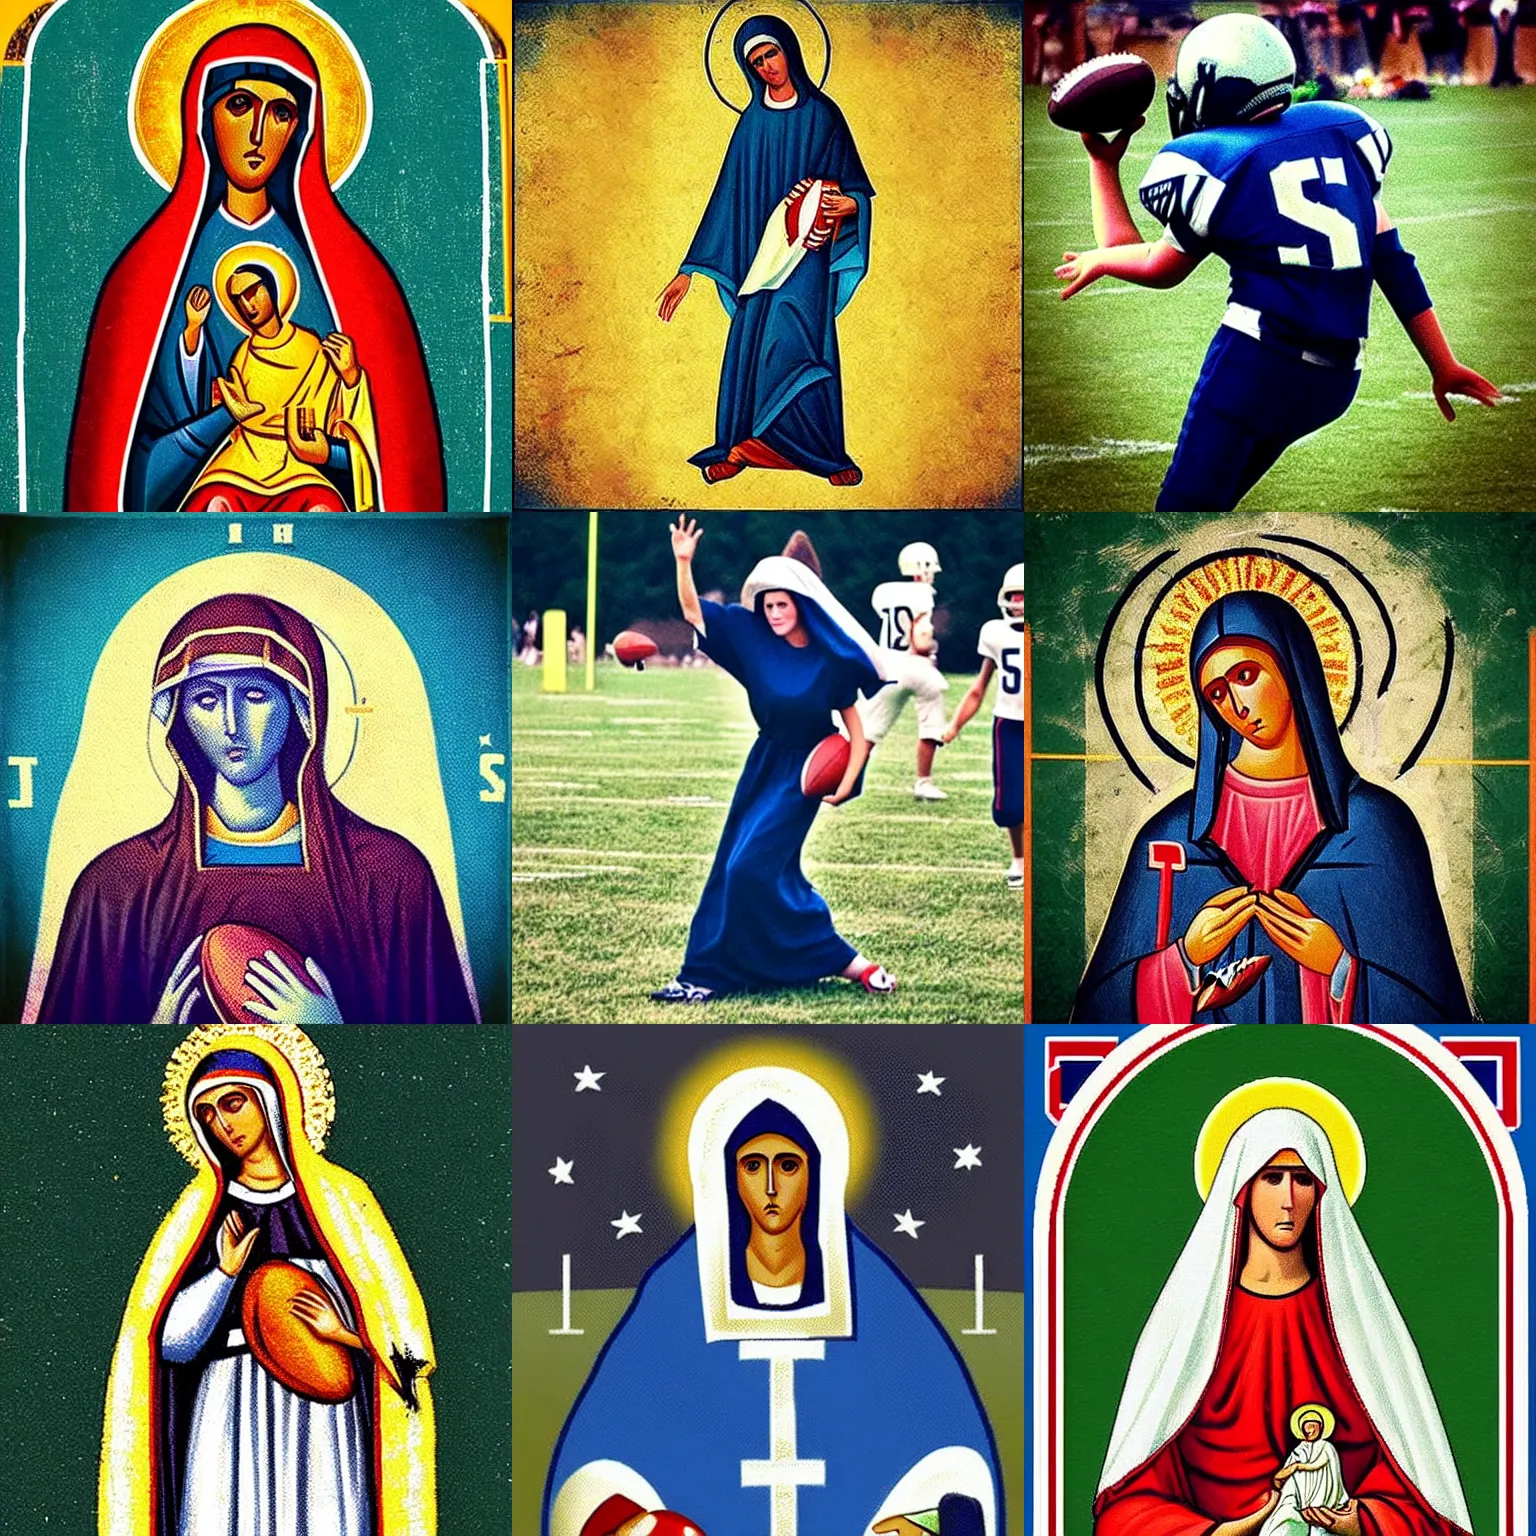 Prompt: “The Virgin Mary playing American football. She is wearing a helmet and playing on a field with a team. The football is being punted. The football is Baby Jesus. Orthodox Iconography”